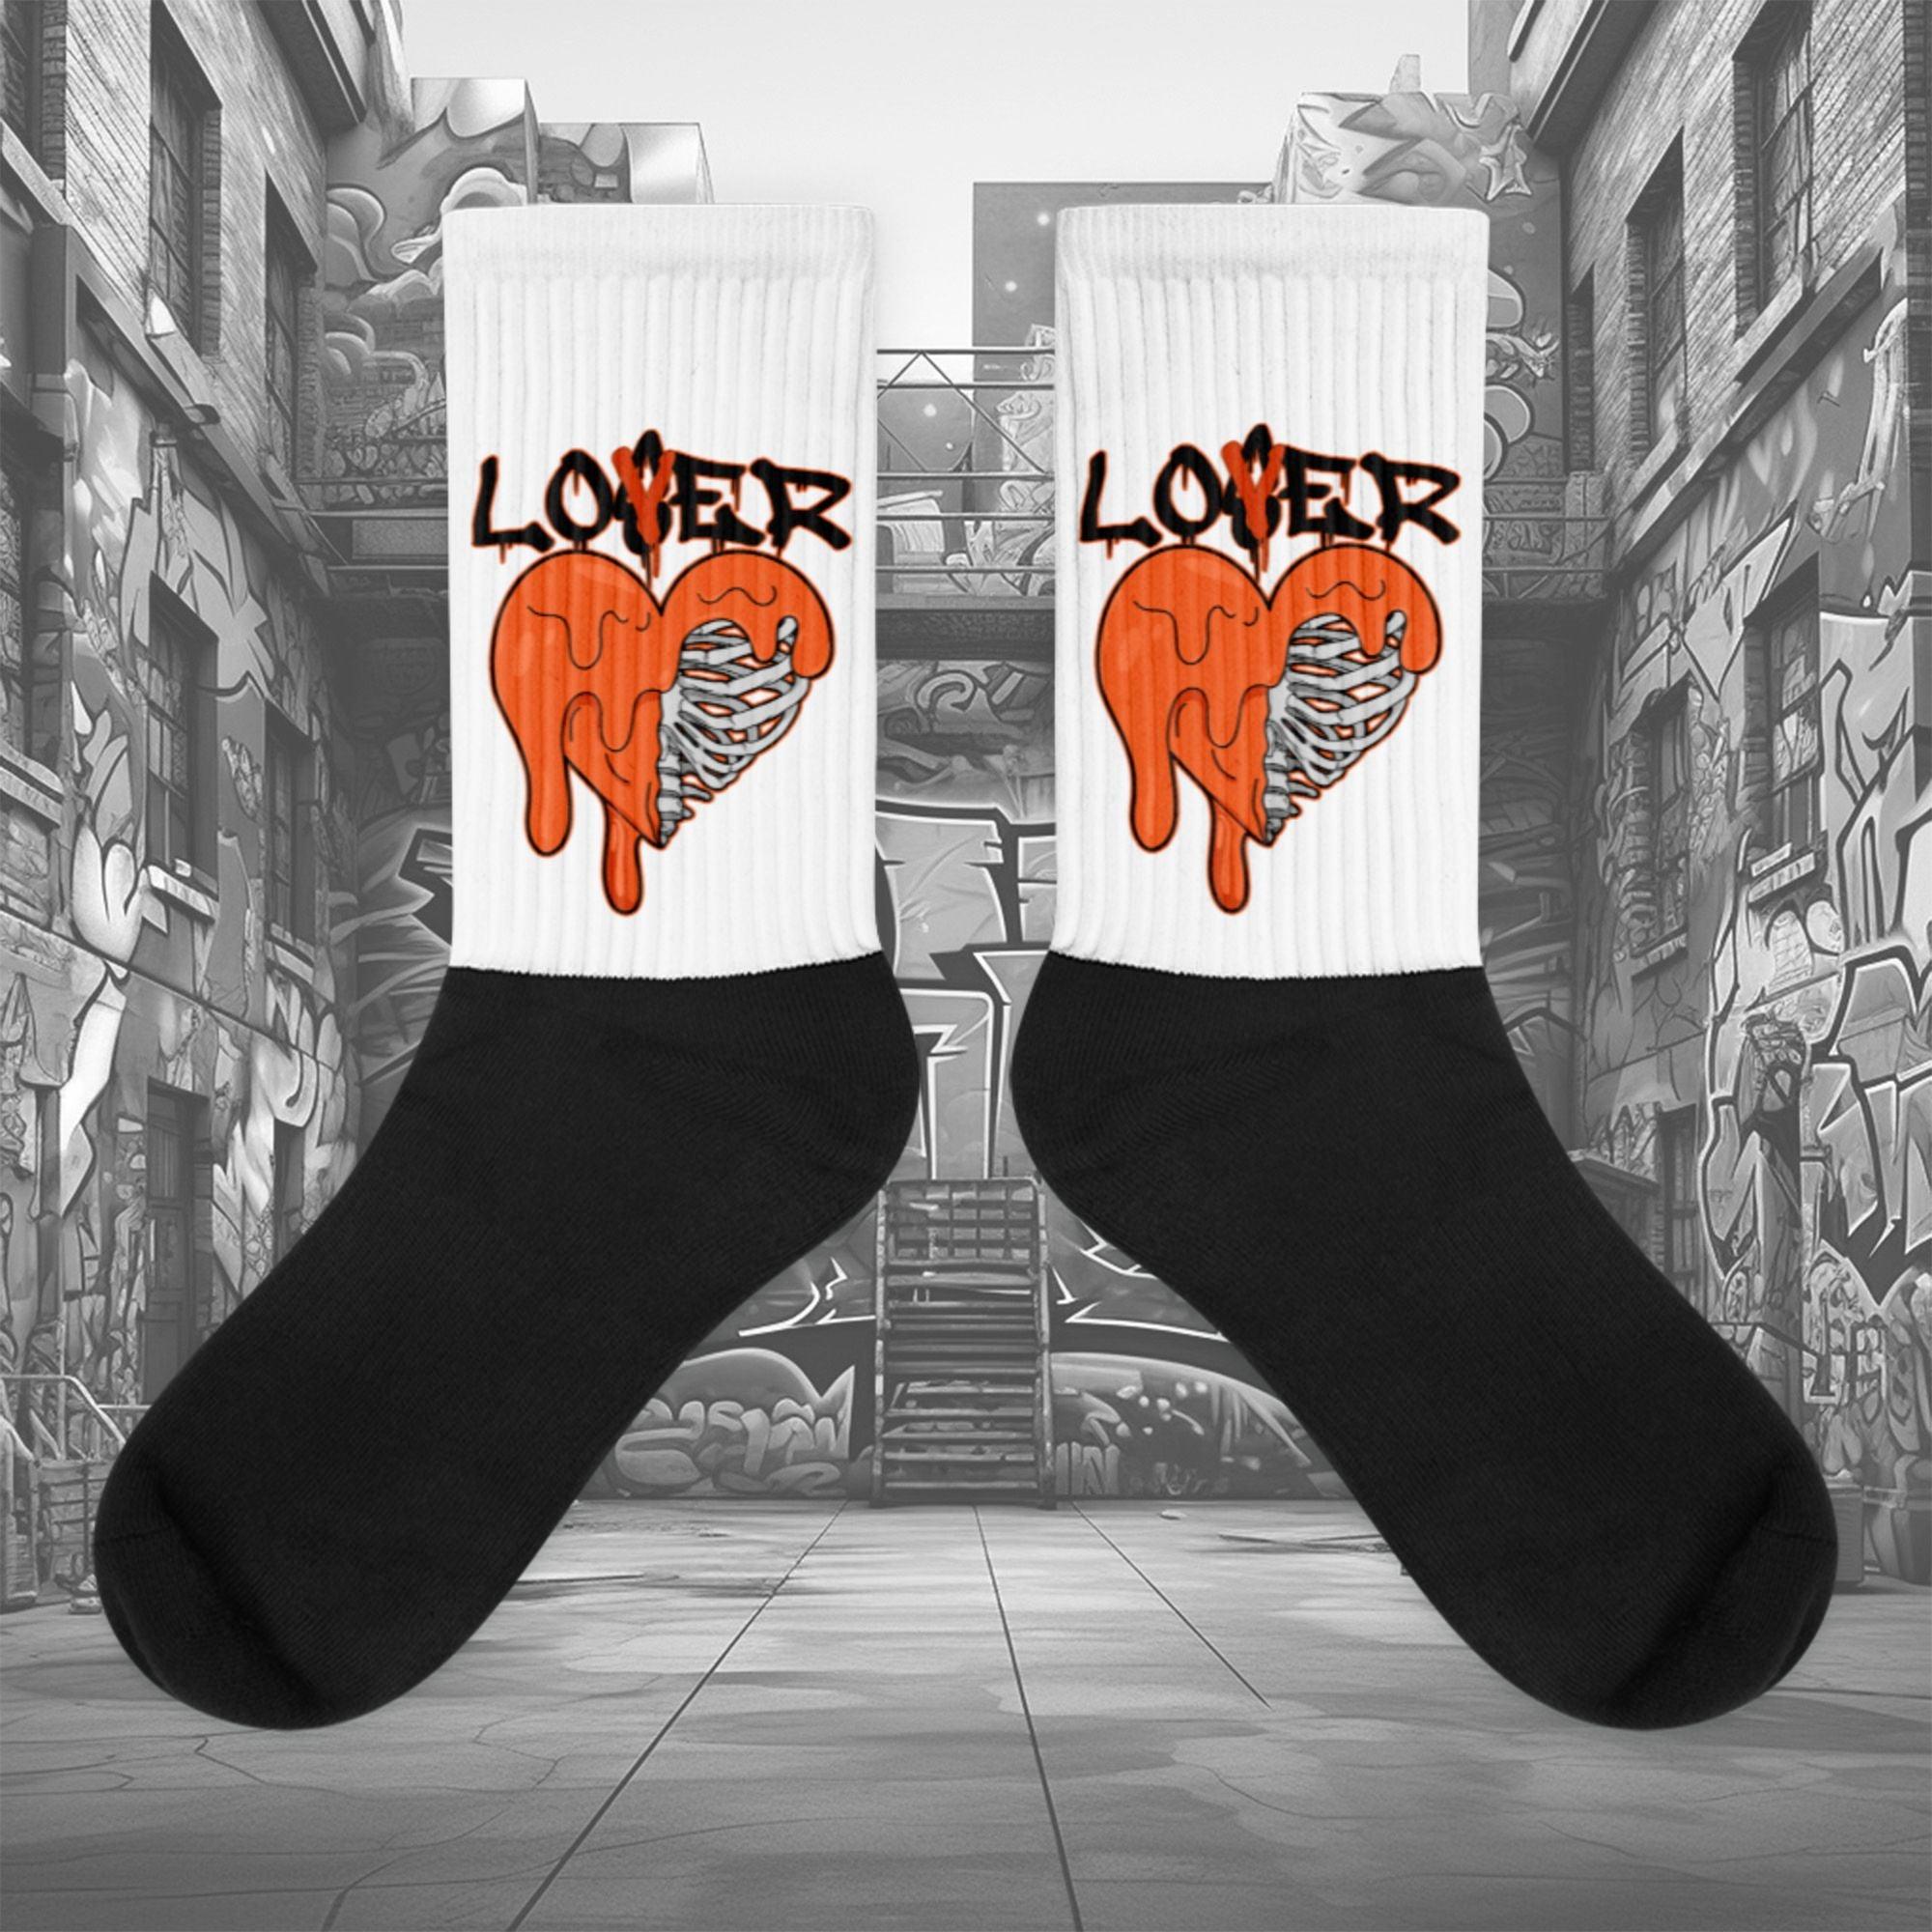  Showcases the view of the socks, highlighting the vibrant ' Lover Loser ‘ design, which perfectly complements the Air Jordan 12 Retro WNBA All-Star Brilliant Orange sneakers. The intricate pattern and color scheme inspired by the  theme are prominently displayed.  Focusing on the ribbed leg , cusioned bottoms and the snug fit of the socks. This angle provides a clear view of the texture and quality of the material blend.